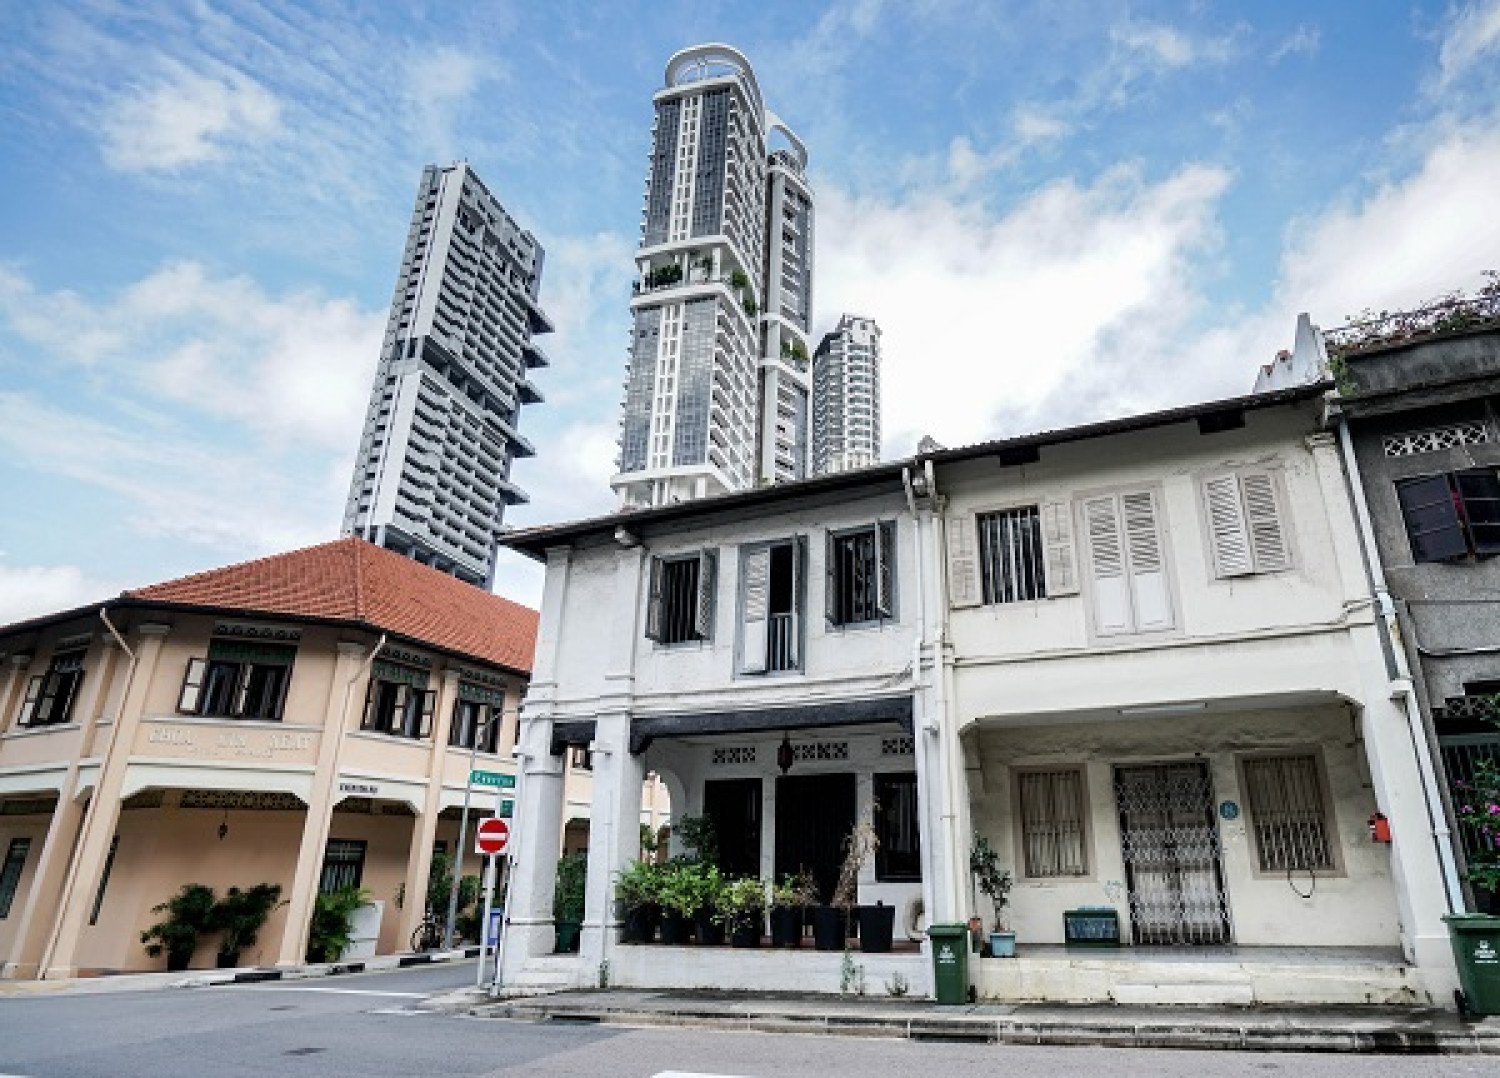 Residential shophouse at Everton Road for sale at $7.5 million - Property News